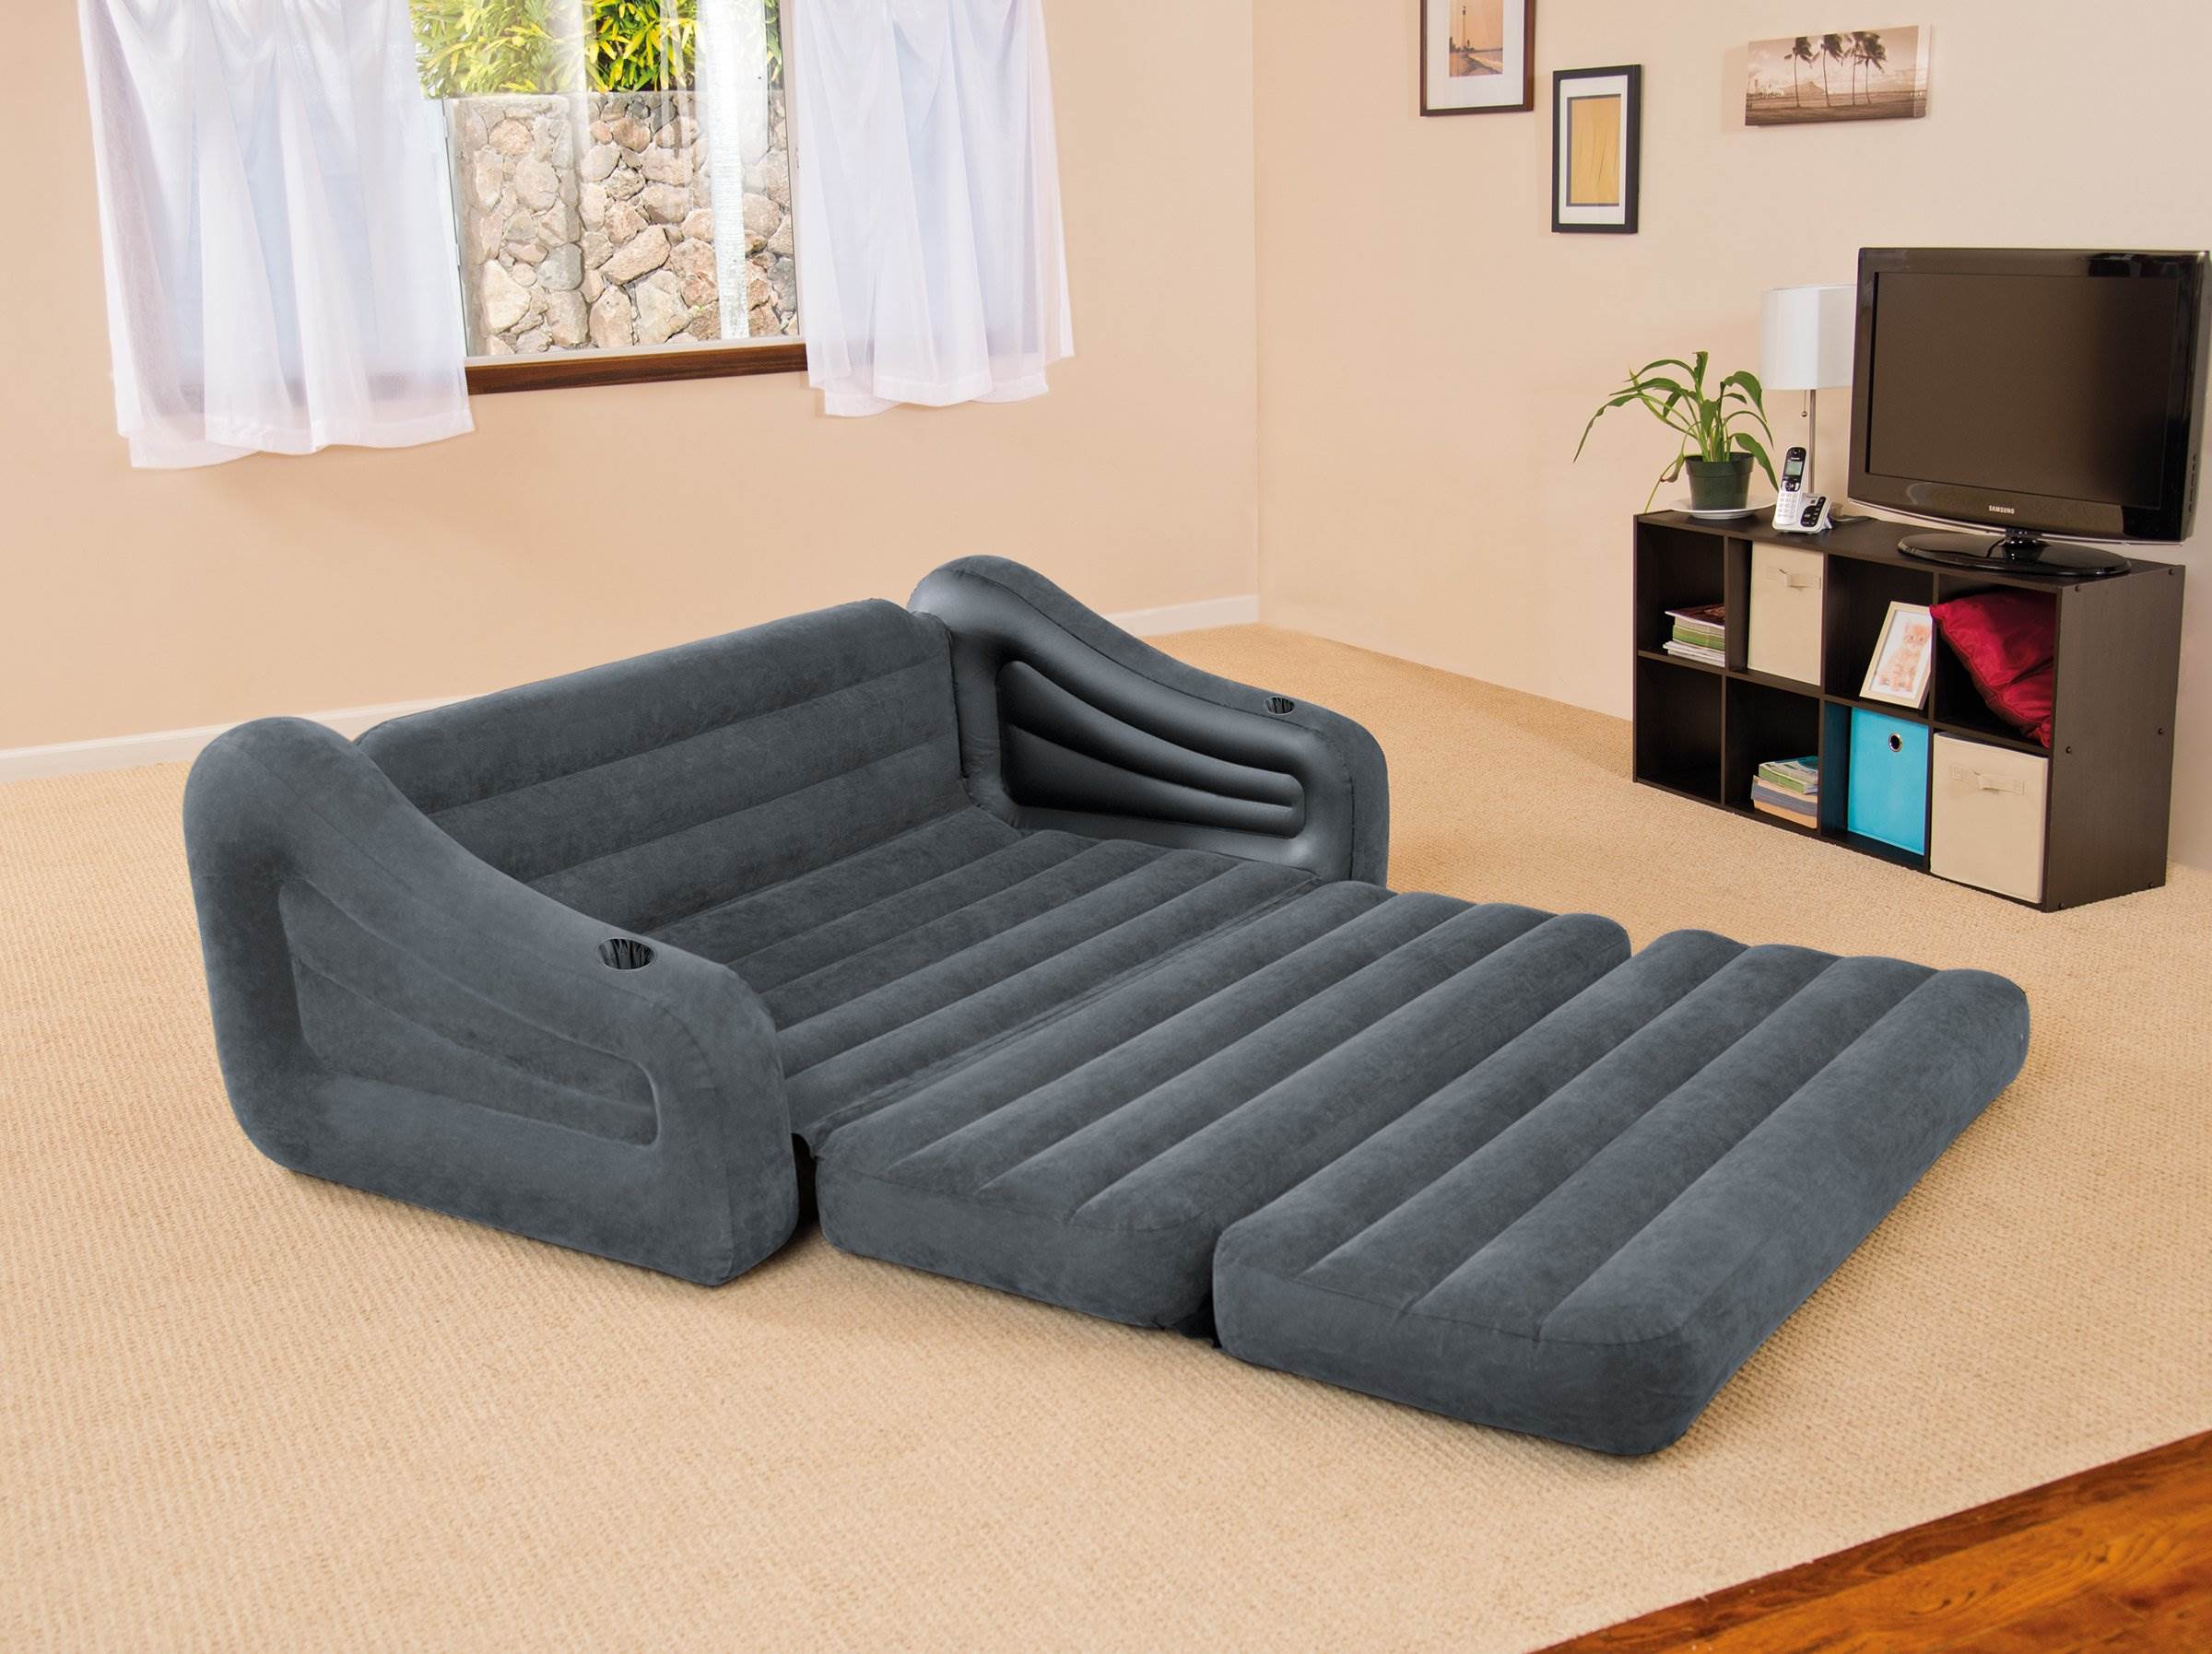 intex pull-out sofa inflatable bed reviews